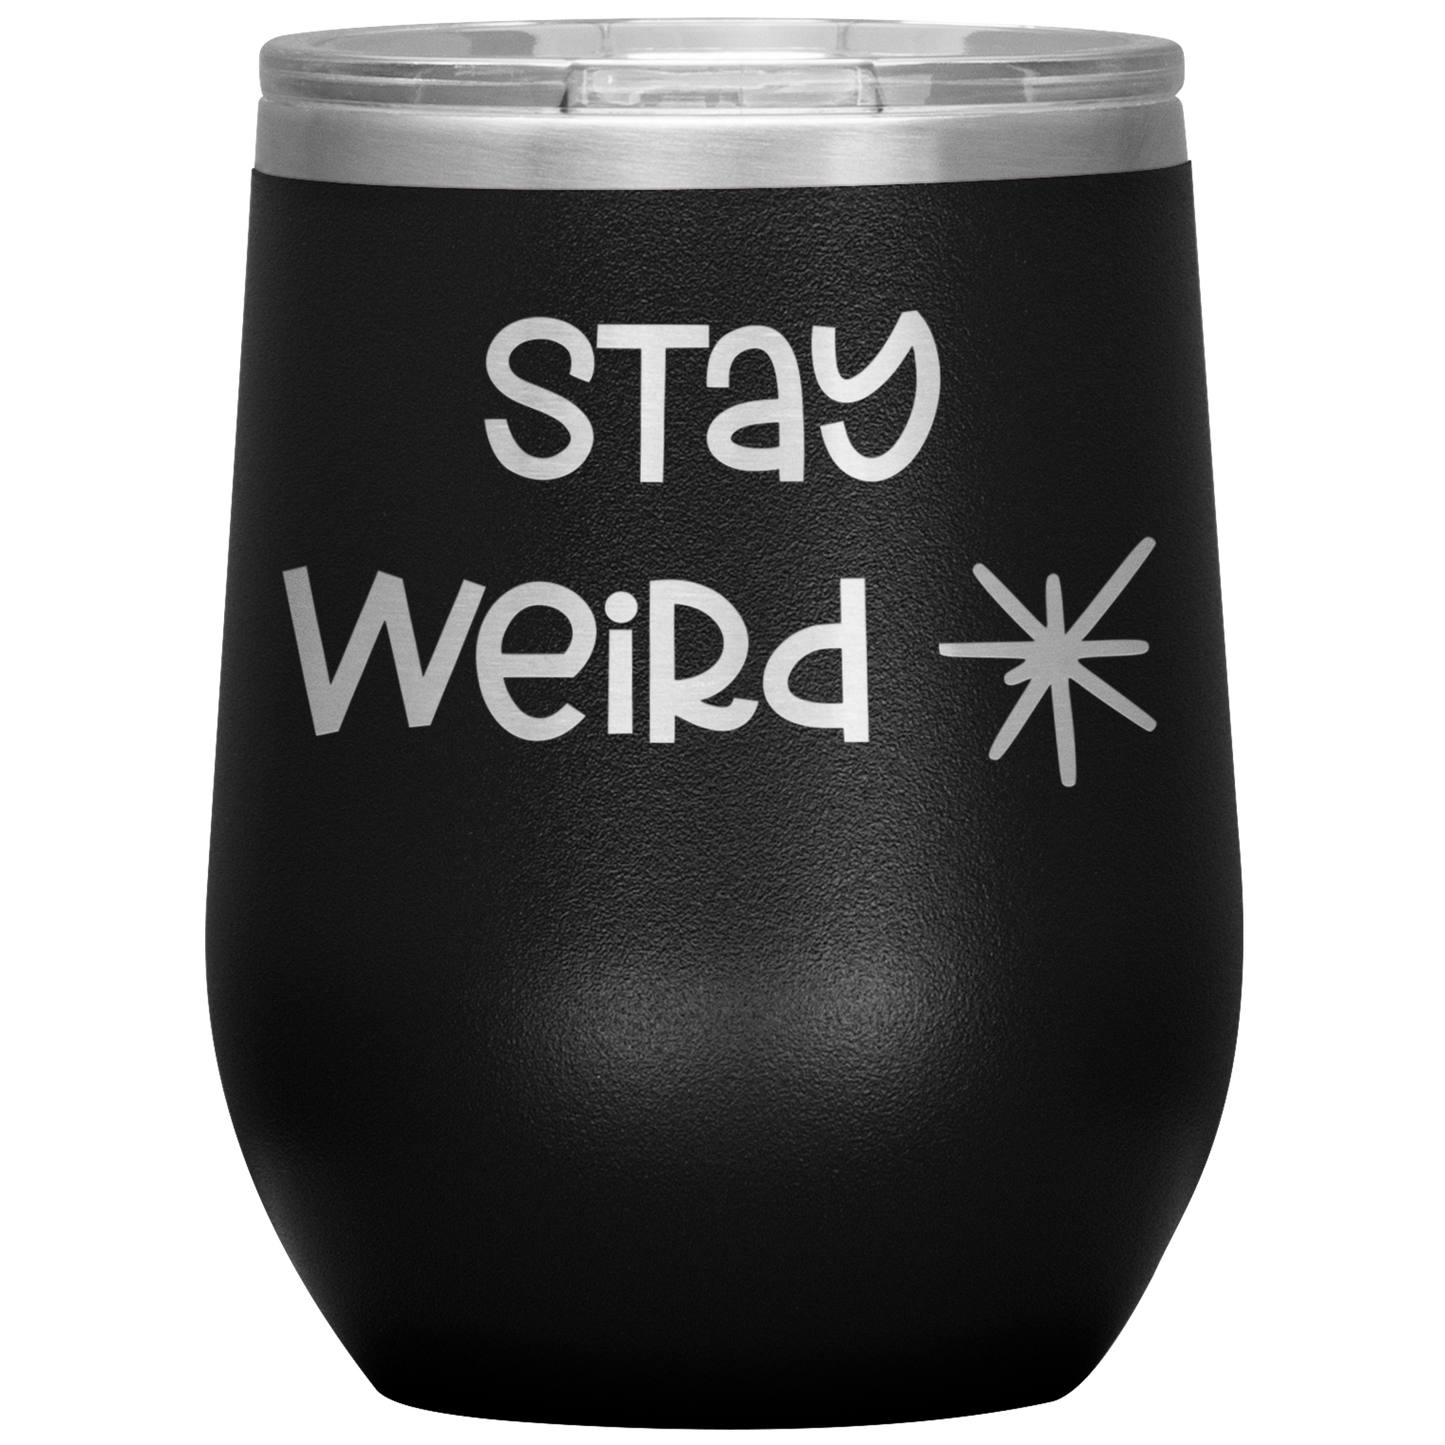 "Stay Weird" 12 oz. Insulated Stainless Steel Wine Tumbler with Lid